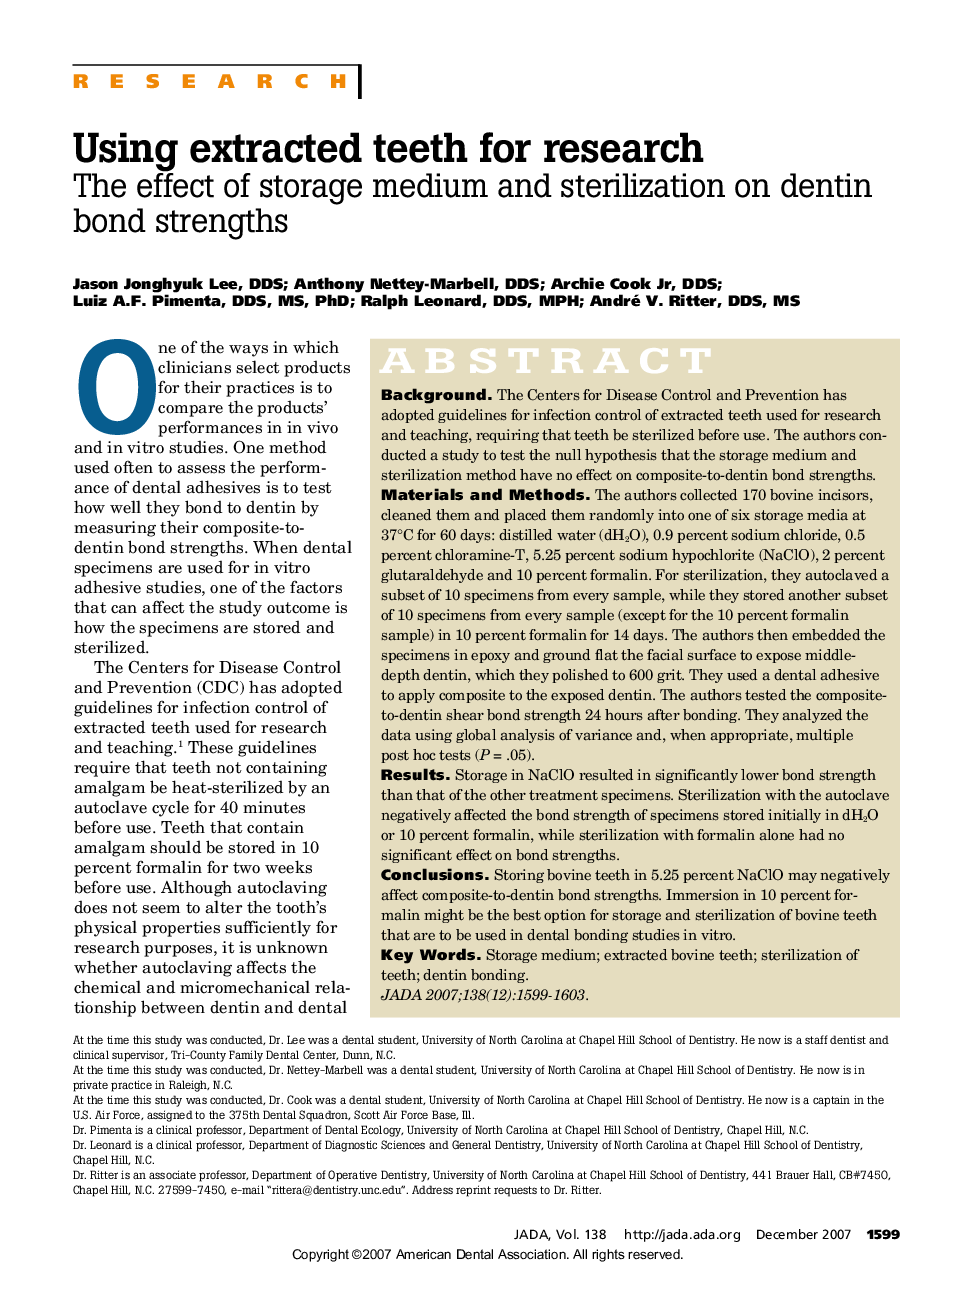 Using Extracted Teeth for Research : The Effect of Storage Medium and Sterilization on Dentin Bond Strengths